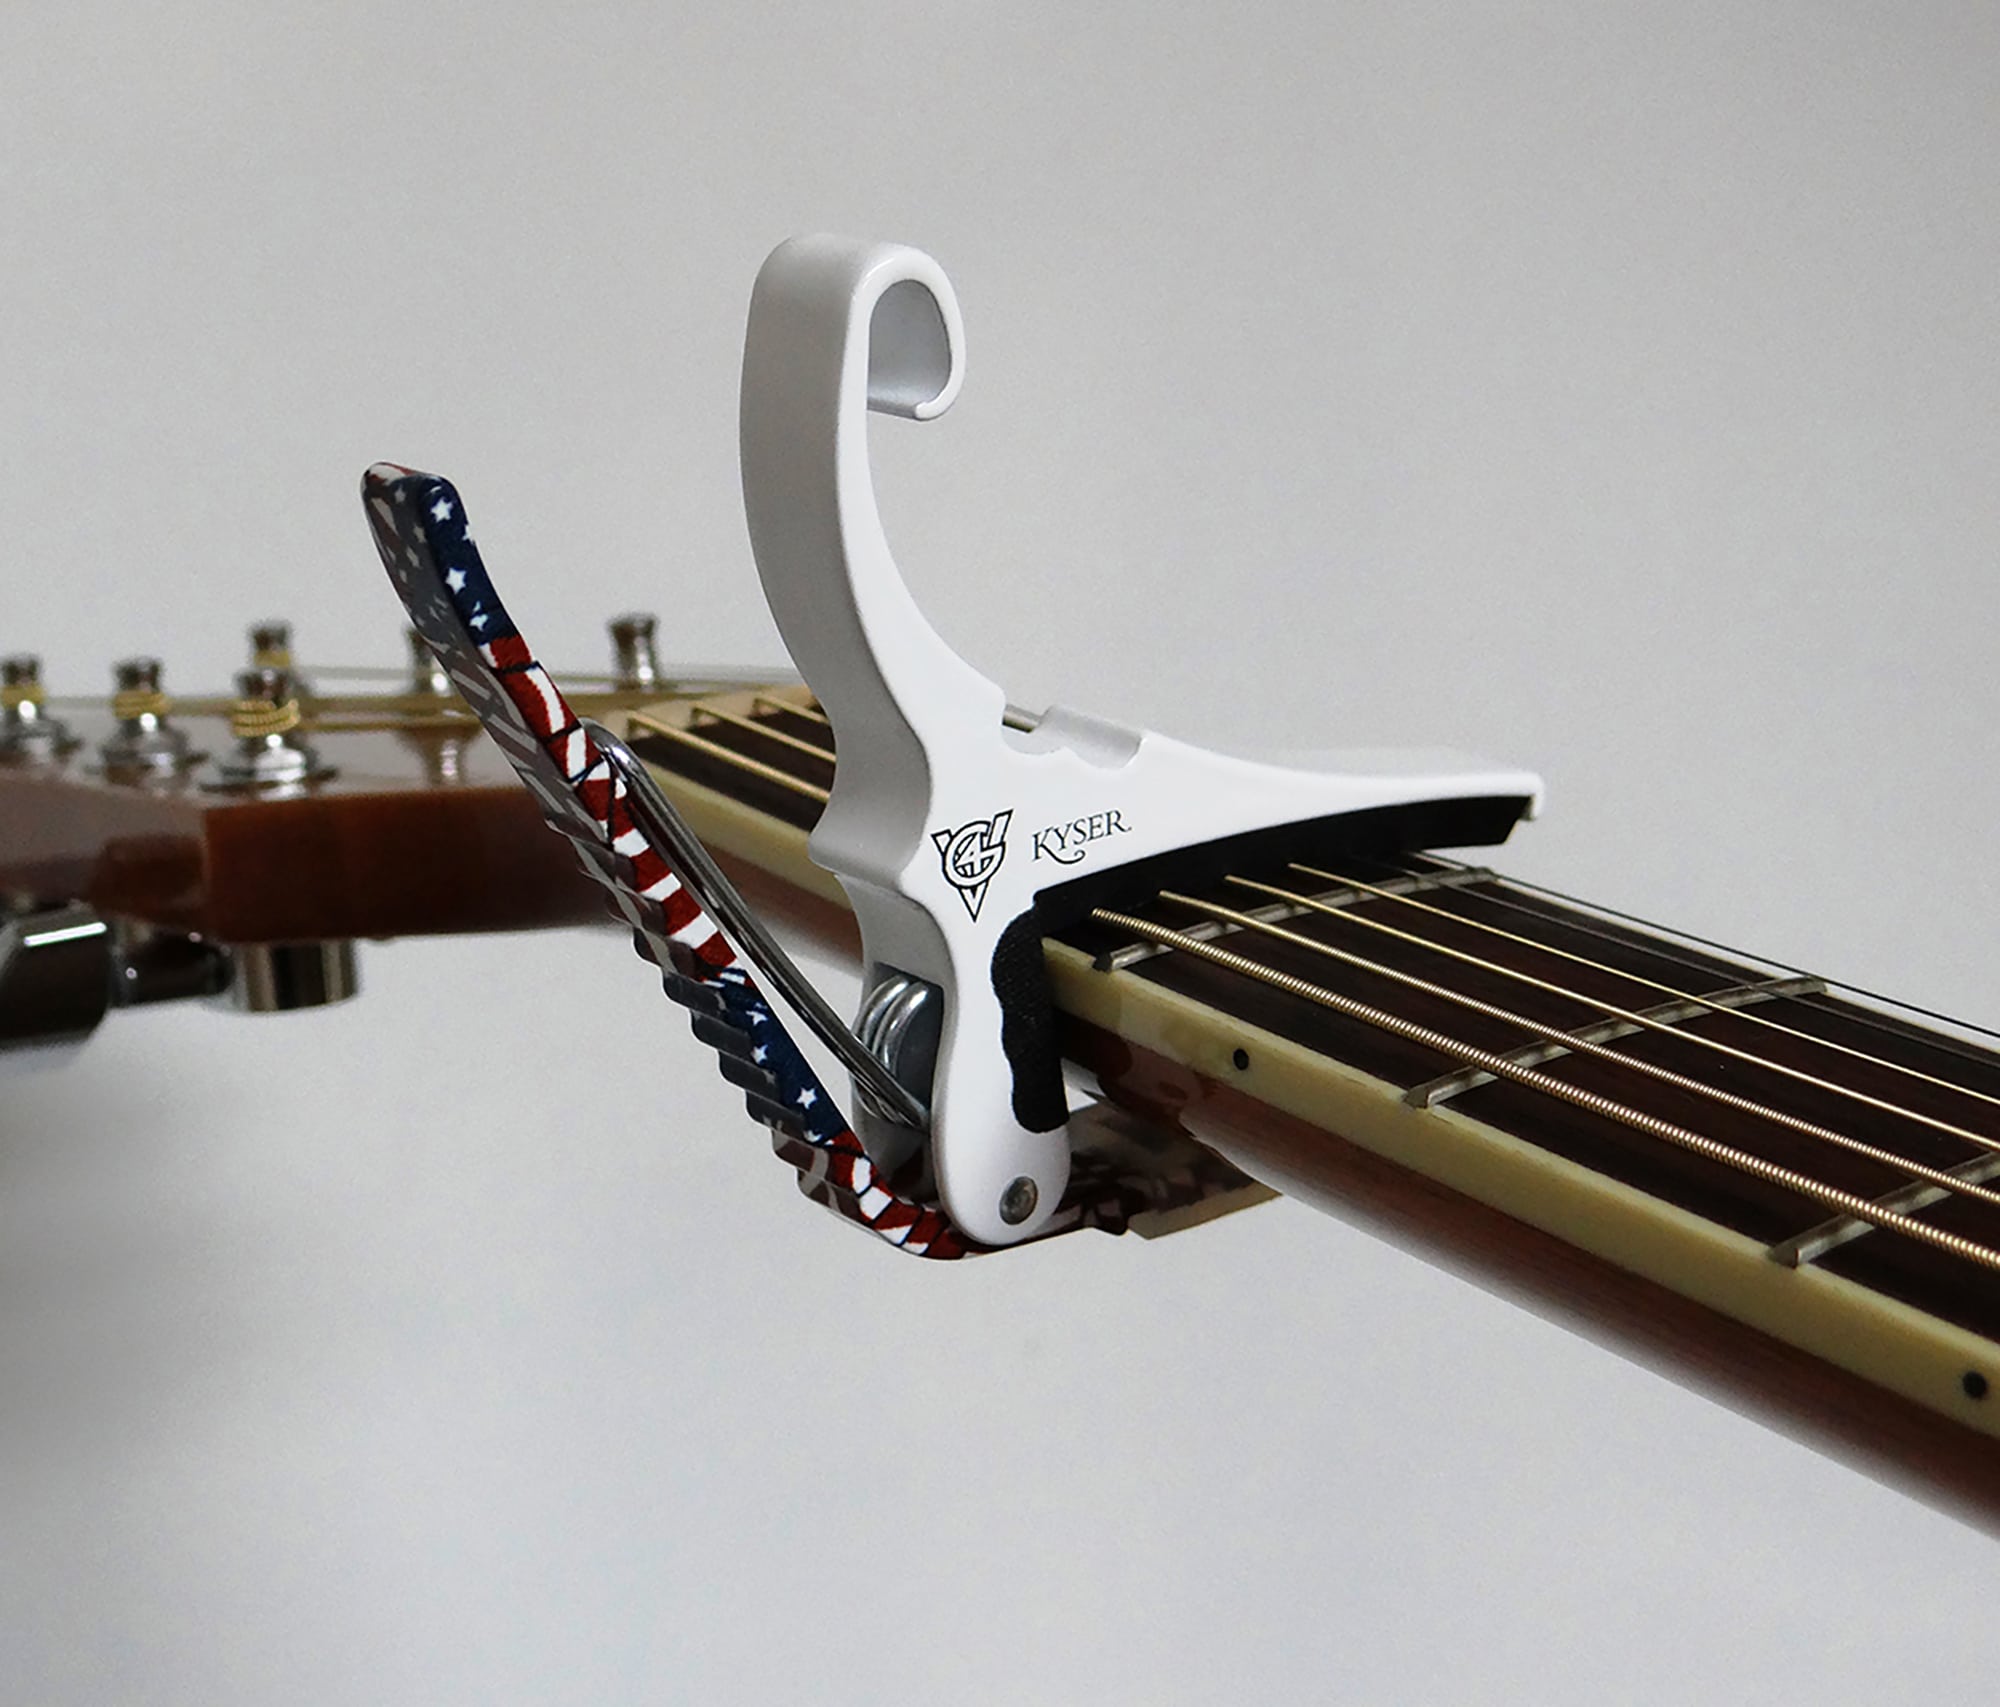 Kyser To Donate All Profits From Sales Of New “G4V Kyser® Quick-Change® Capo” To Guitars For Vets®